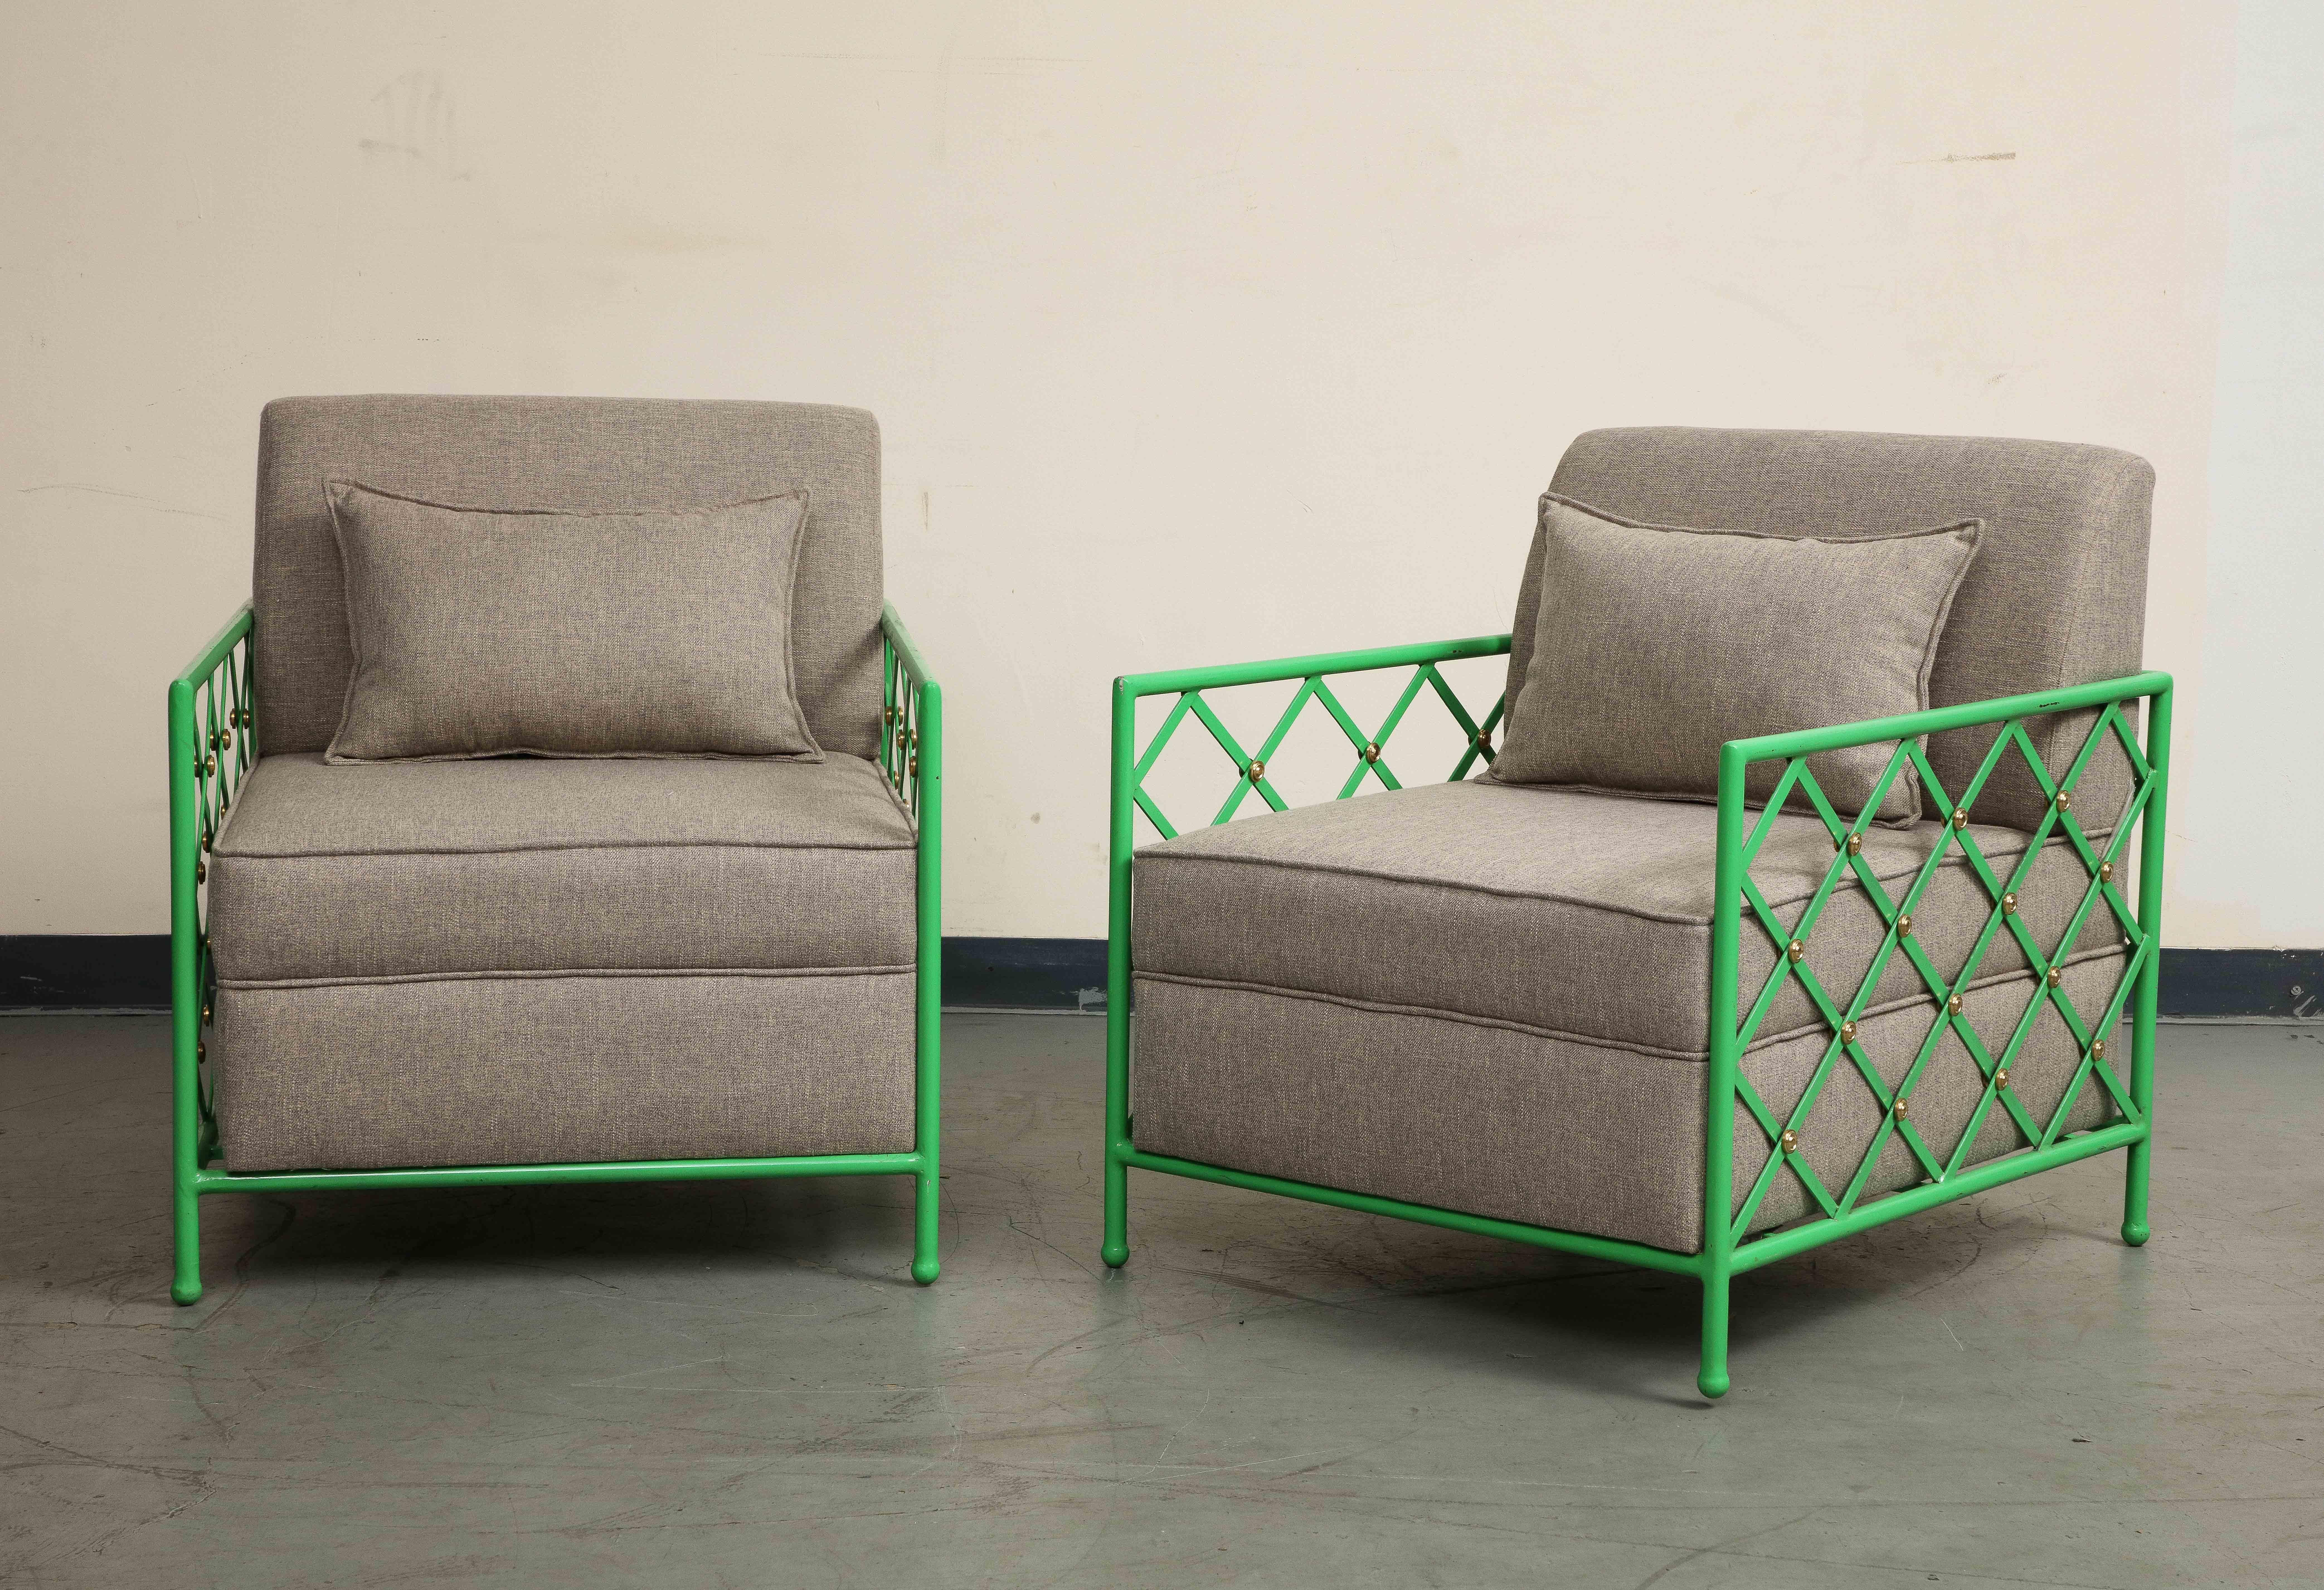 Pair of 20th century bright green enameled iron cube chairs. Mid-Century Modern style. Cross hatch pattern made of flat metal pieces on the back and sides with gilt fasteners/accents. Neutral / gray upholstered cushions with accent pillows in good